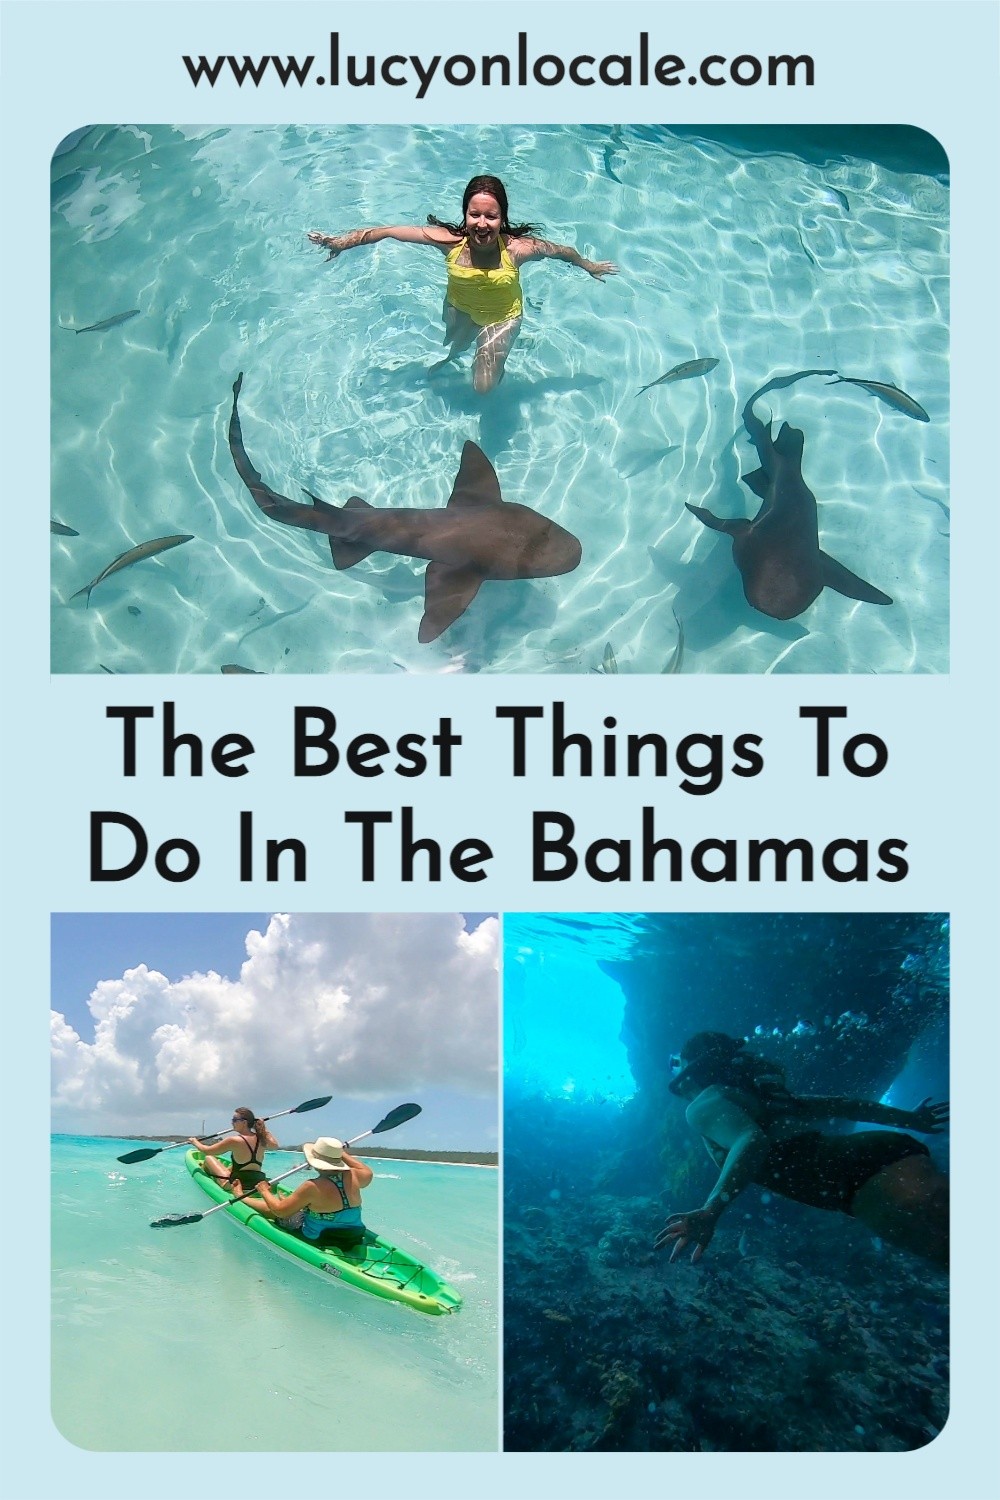 Top 10 Things To Do In The Bahamas